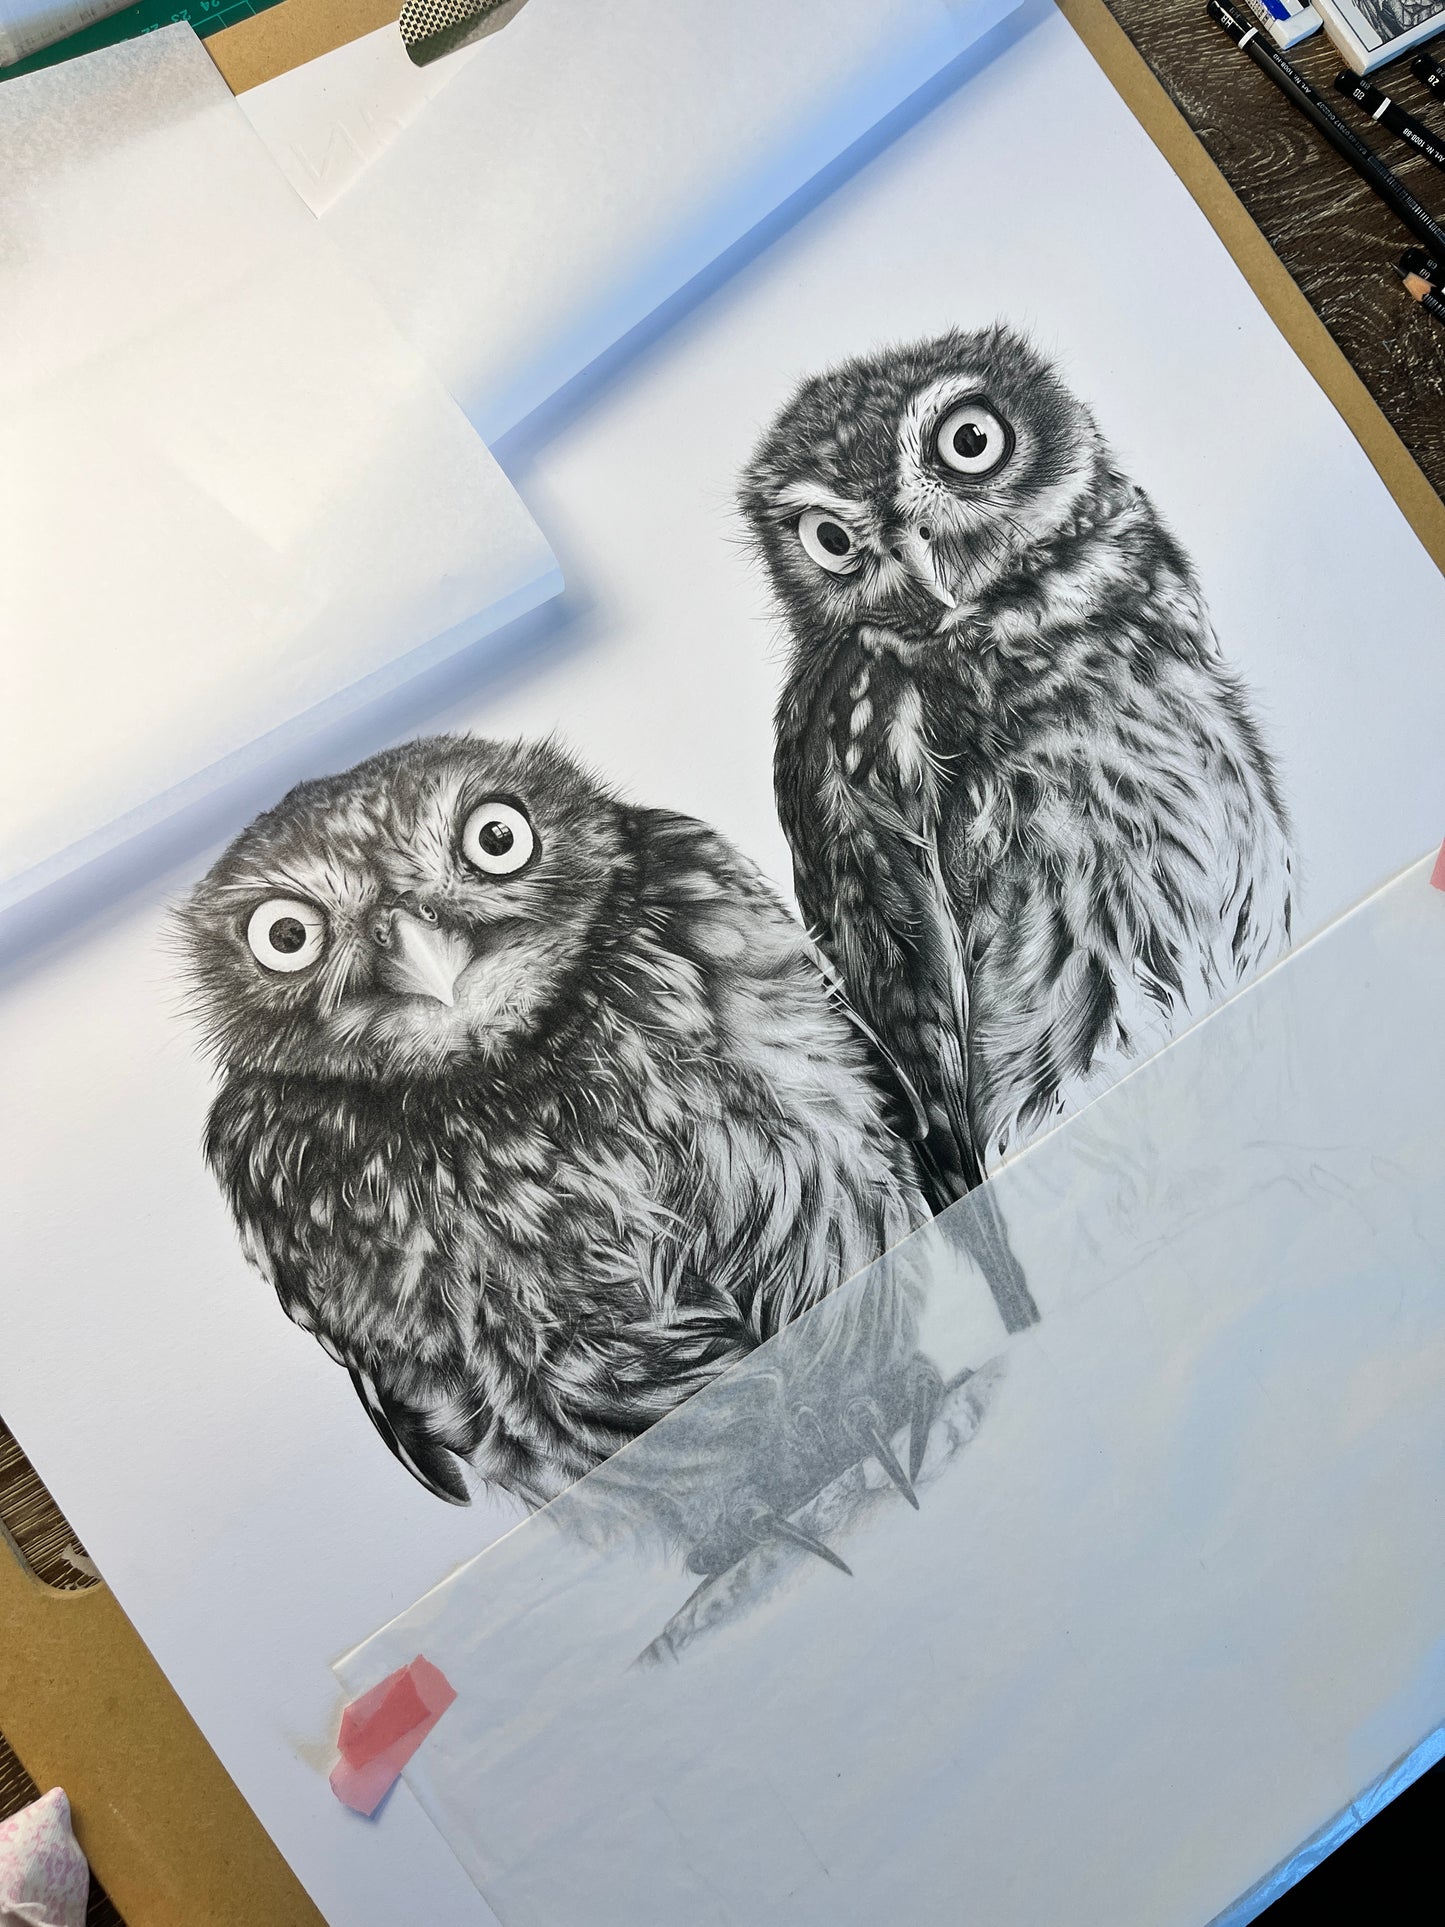 Cute little owls together